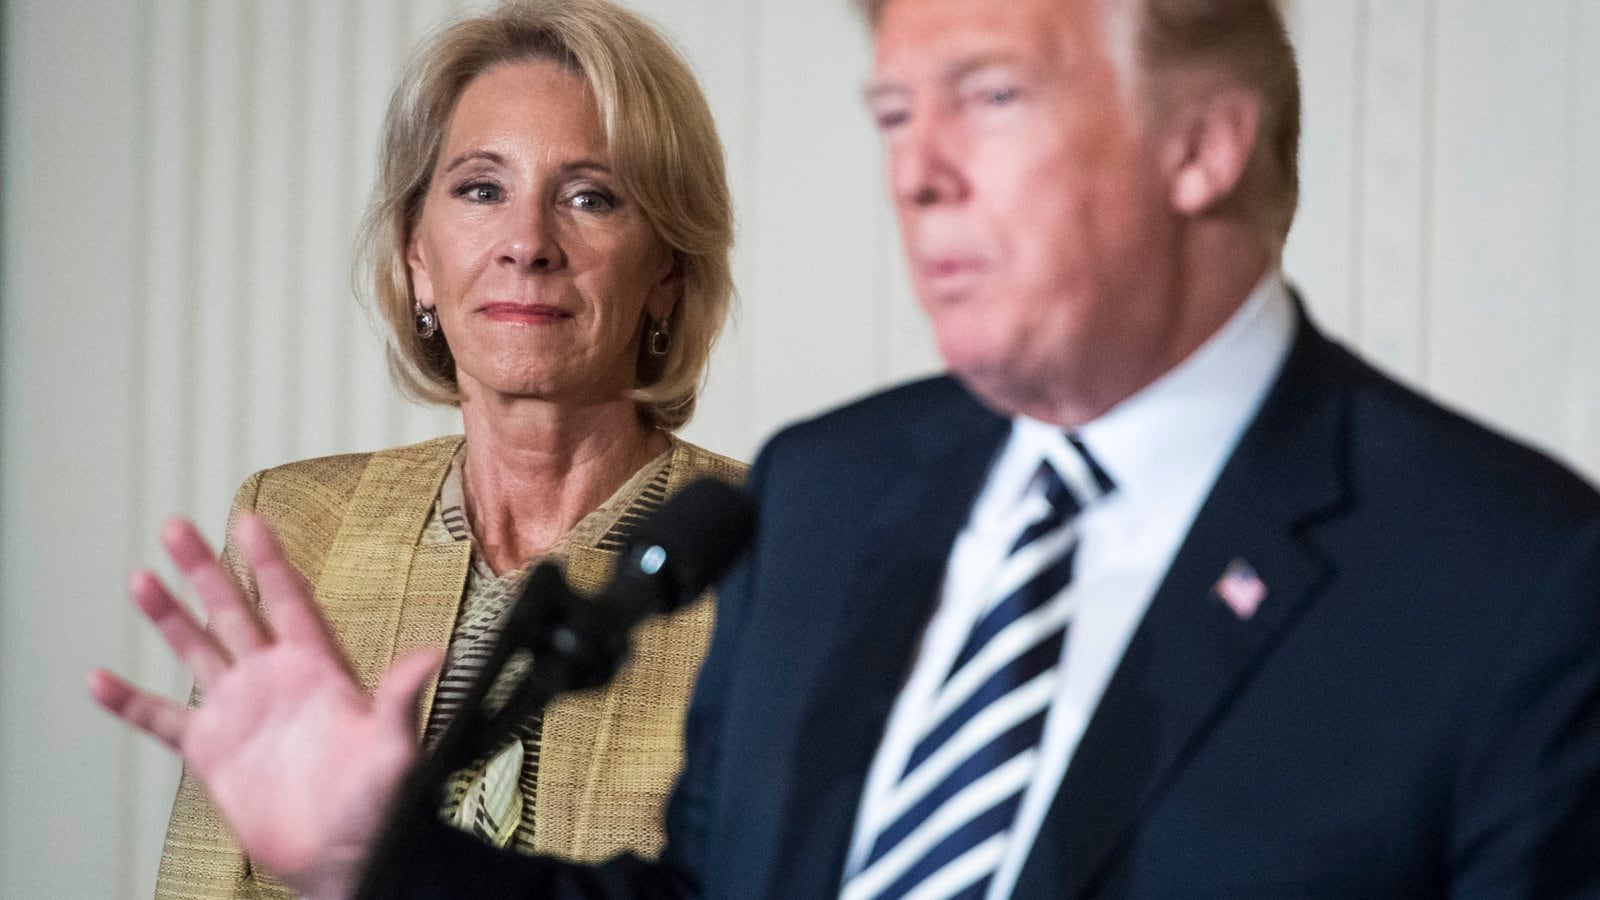 WASHINGTON, DC - MAY 2: Secretary of Education Betsy DeVos listens as President Donald J. Trump gives remarks at the National Teacher of the Year reception at the White House on May 02, 2018 in Washington, DC. (Photo by Jabin Botsford/The Washington Post via Getty Images)